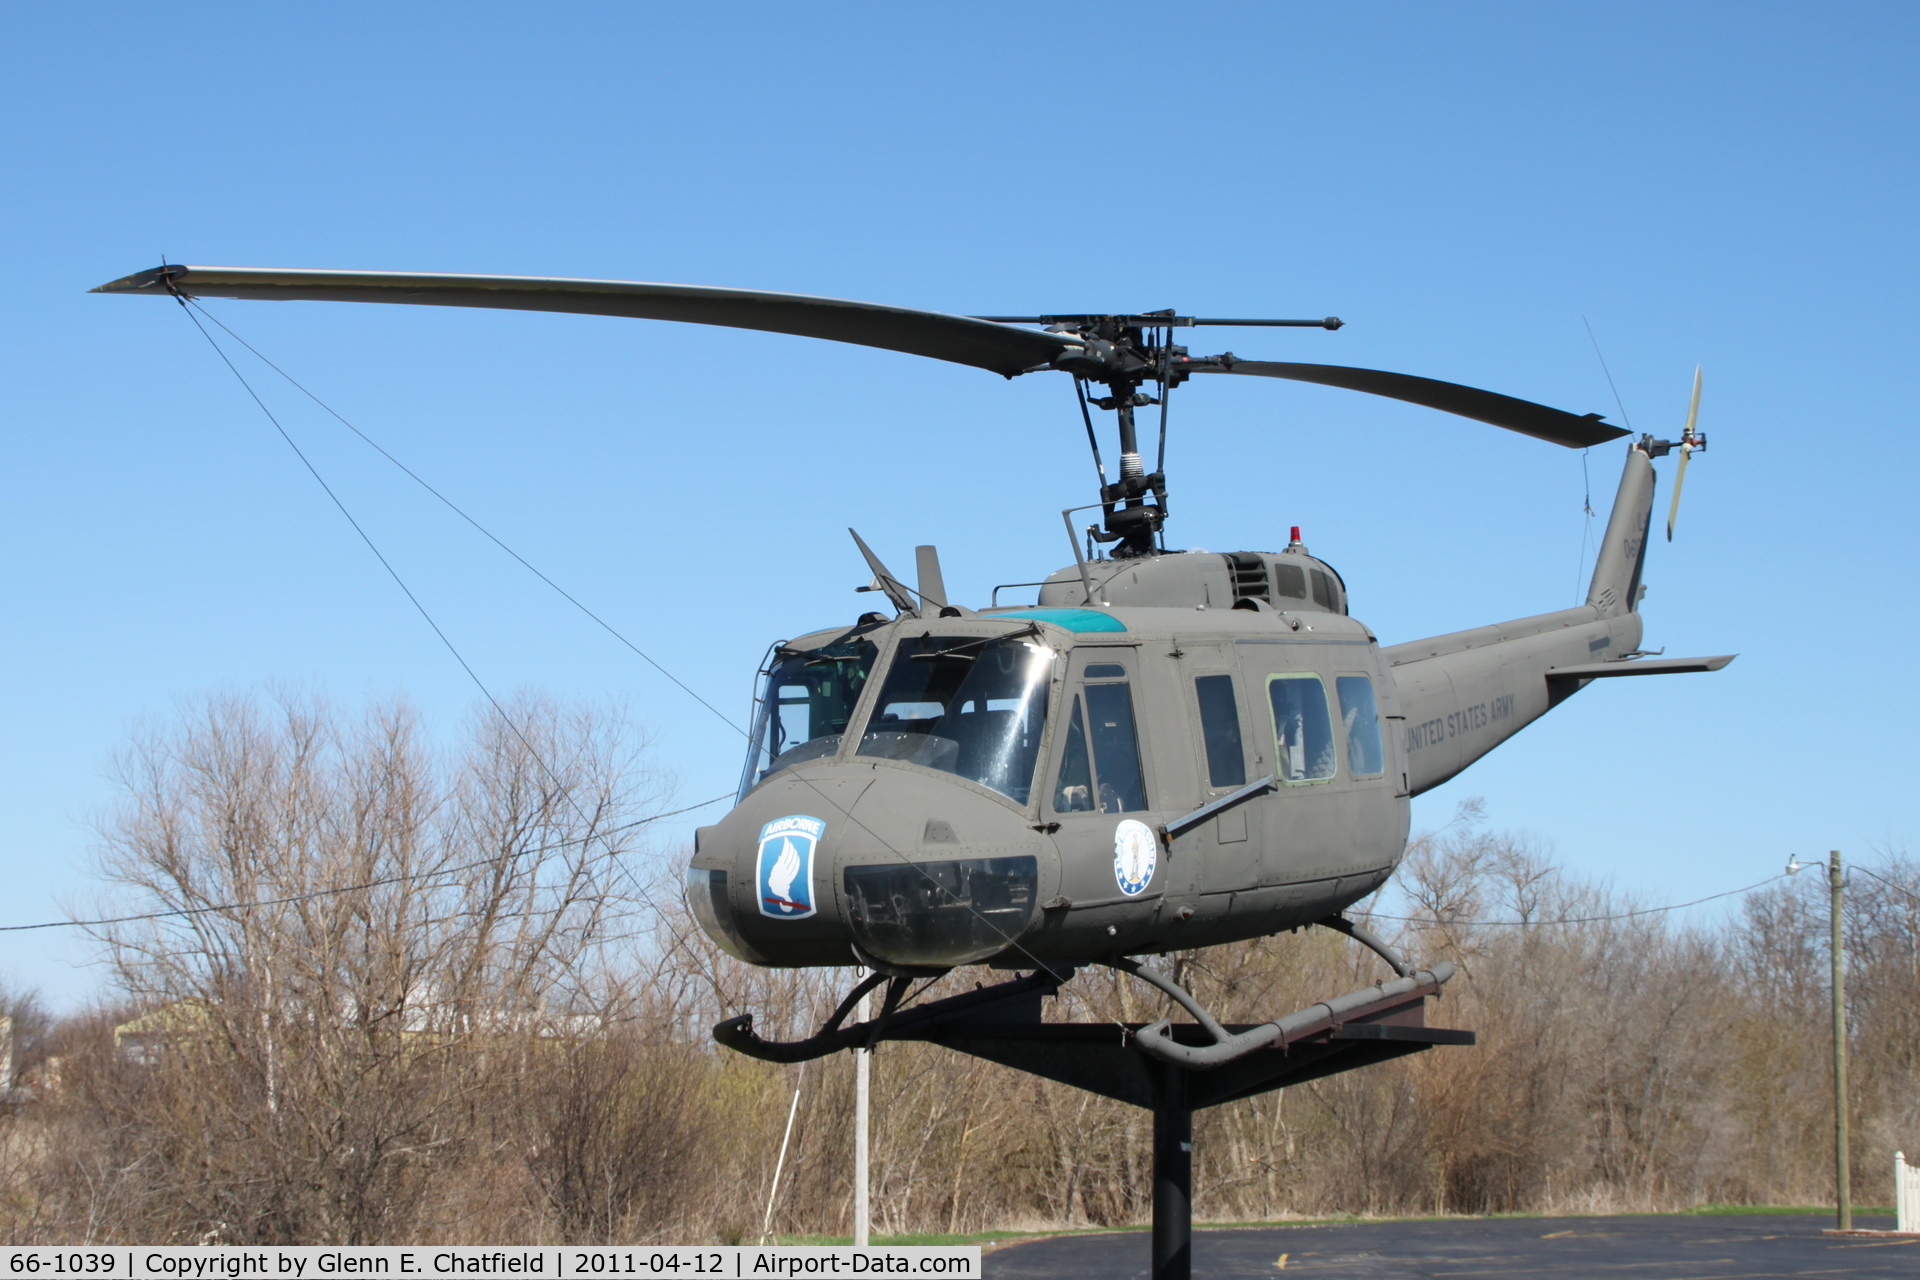 66-1039, 1966 Bell UH-1H Iroquois C/N 5622, At the VFW post in Dixon, IL